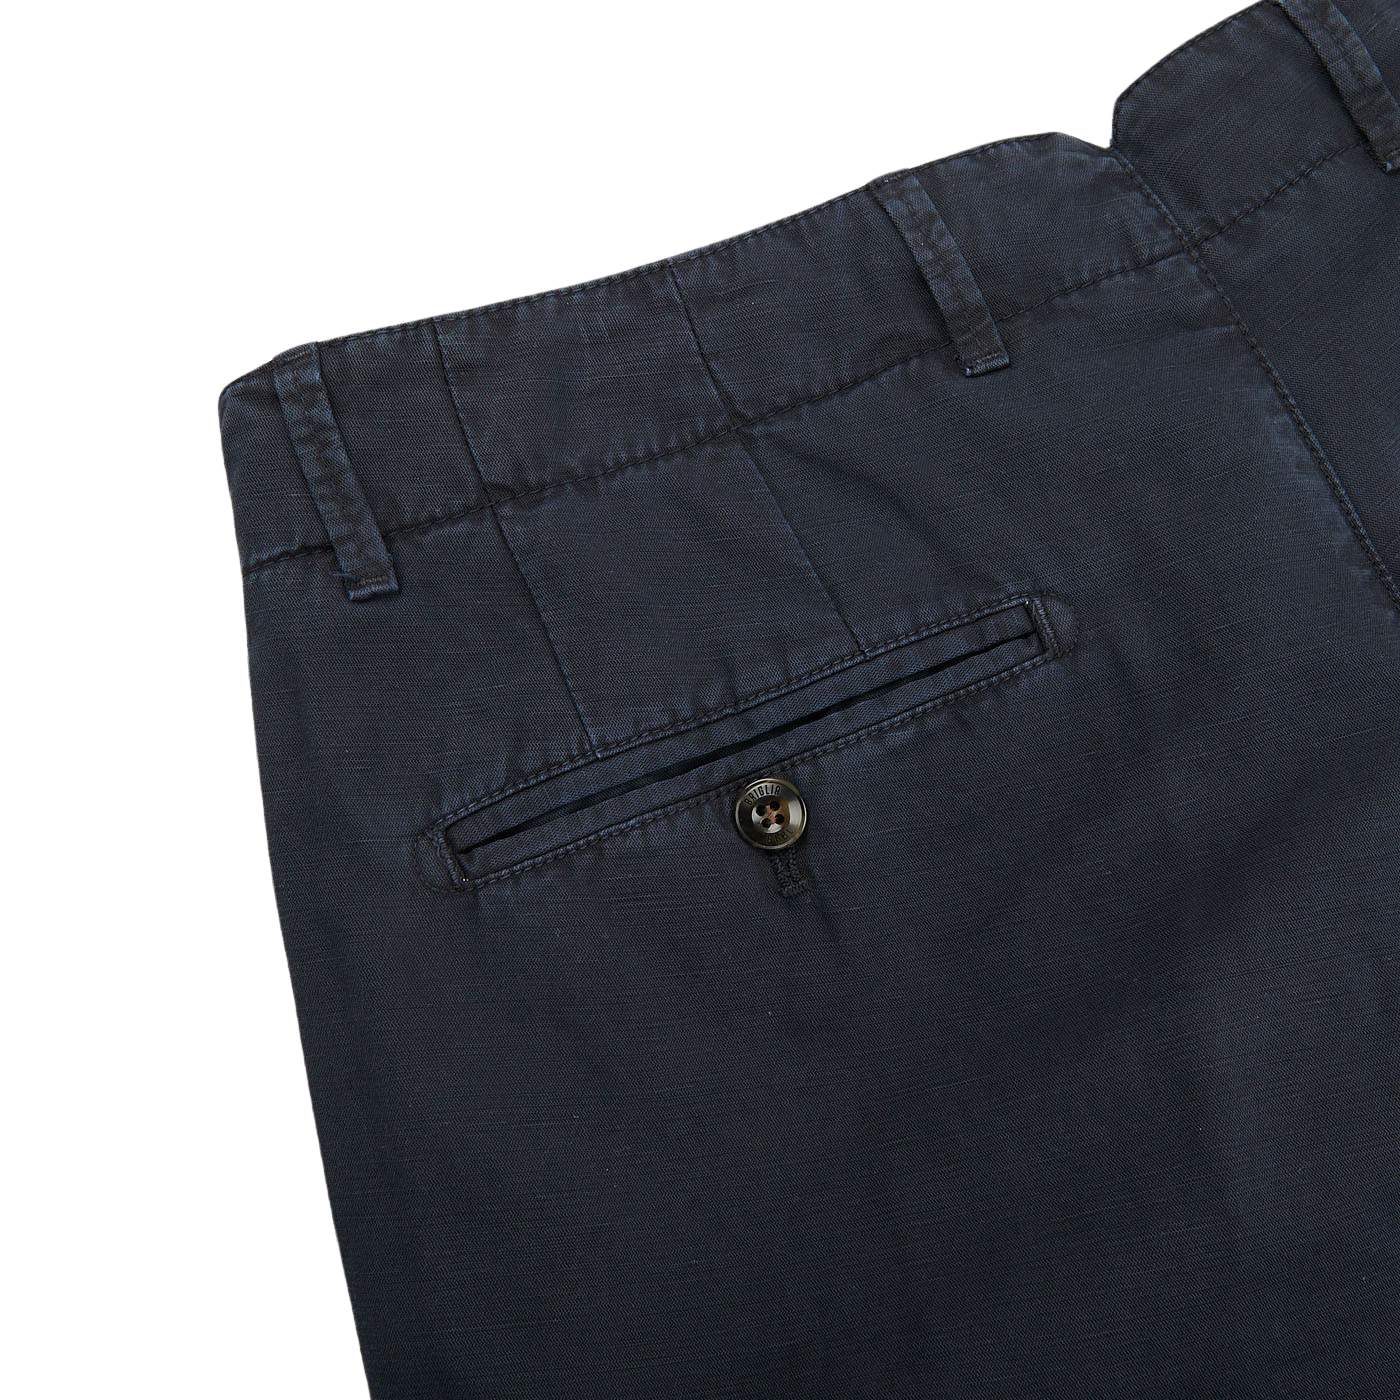 A close up of Briglia's Navy Blue Cotton Linen BG59 Pleated Chinos, made from an upcycled mix of cotton and linen.